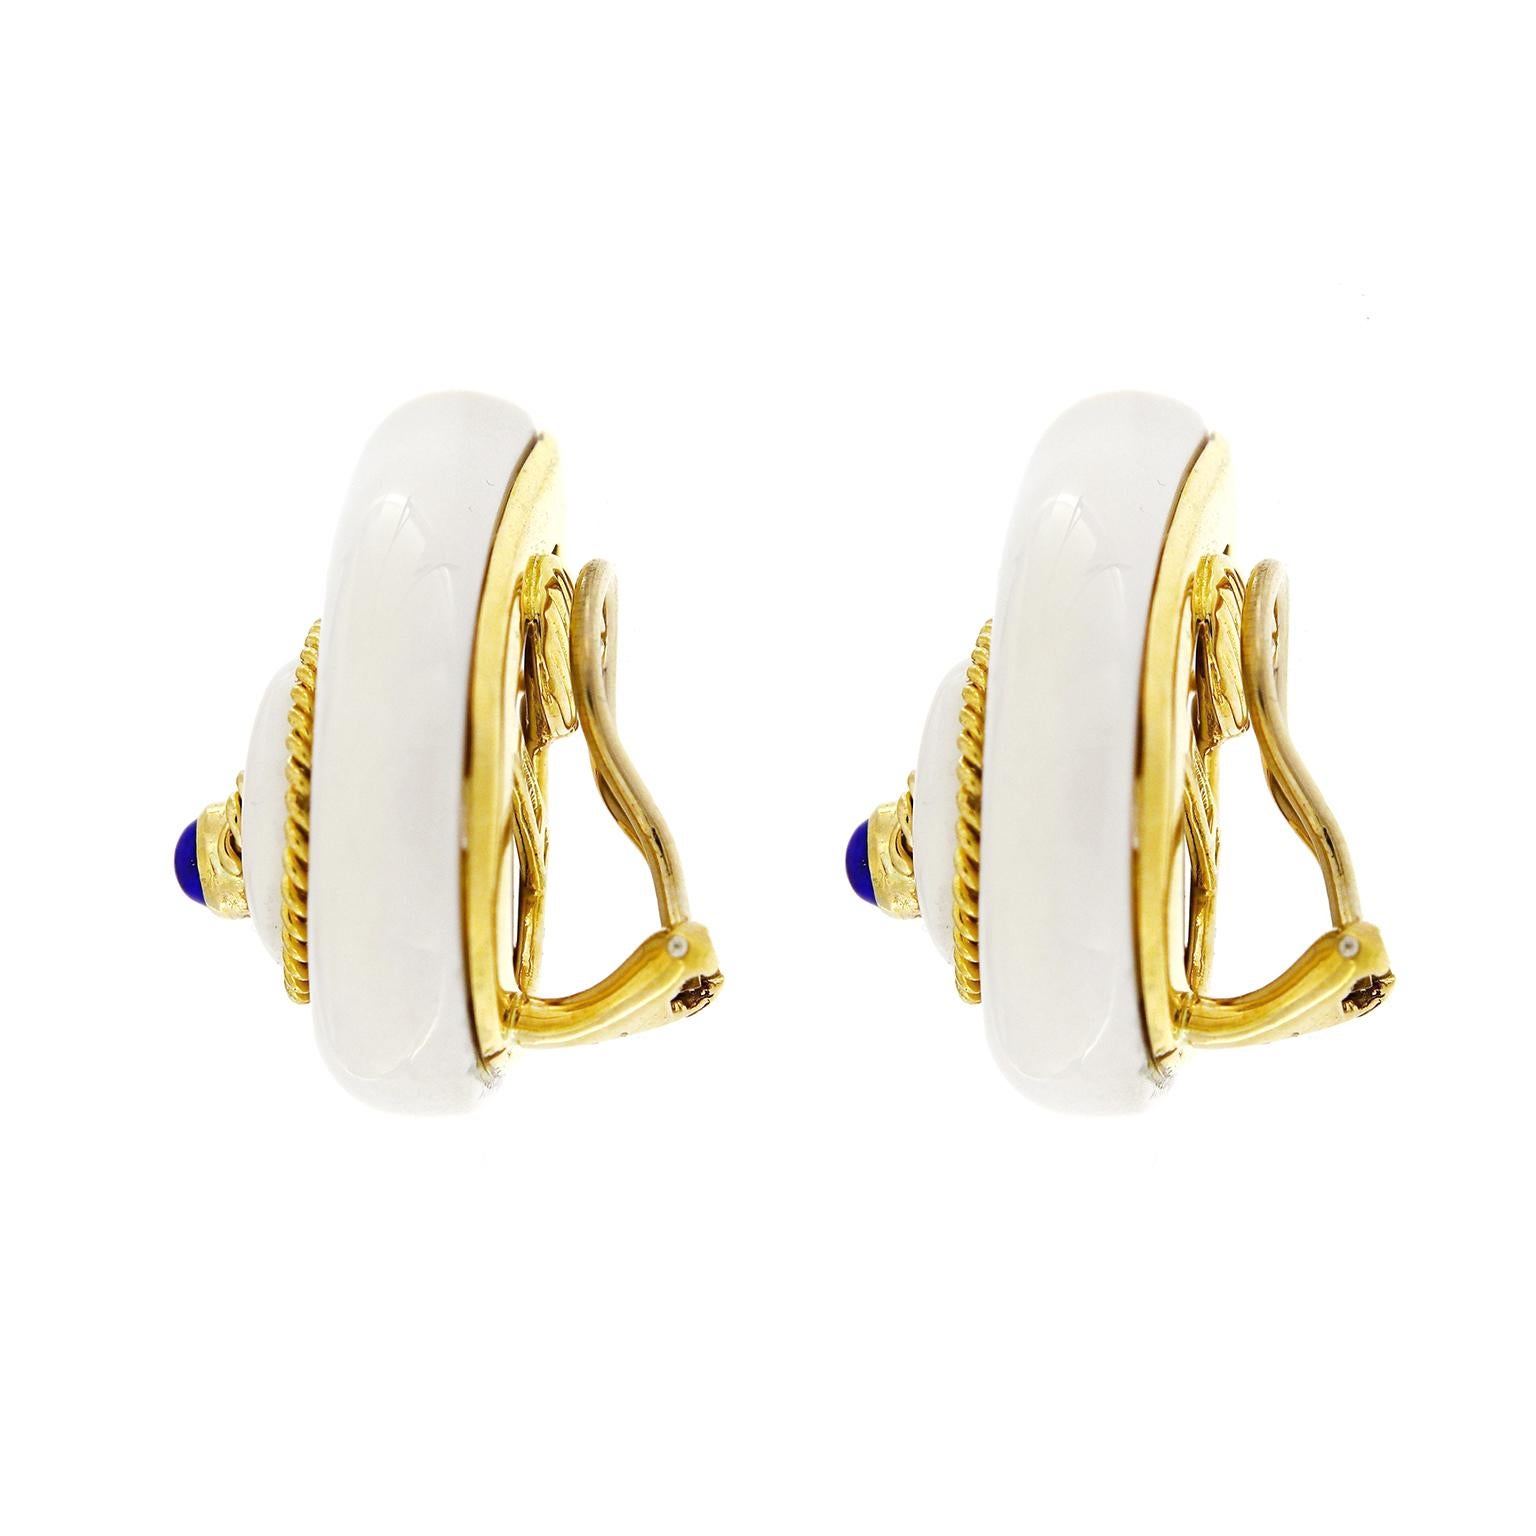 Gemstones illustrate a polished snail shell. Cacholong is carved in an asymmetrical teardrop shape as the base. An 18k yellow gold braid rotates in a coil for definition of the shell, while drawing the eye to a lapis lazuli in the center for a